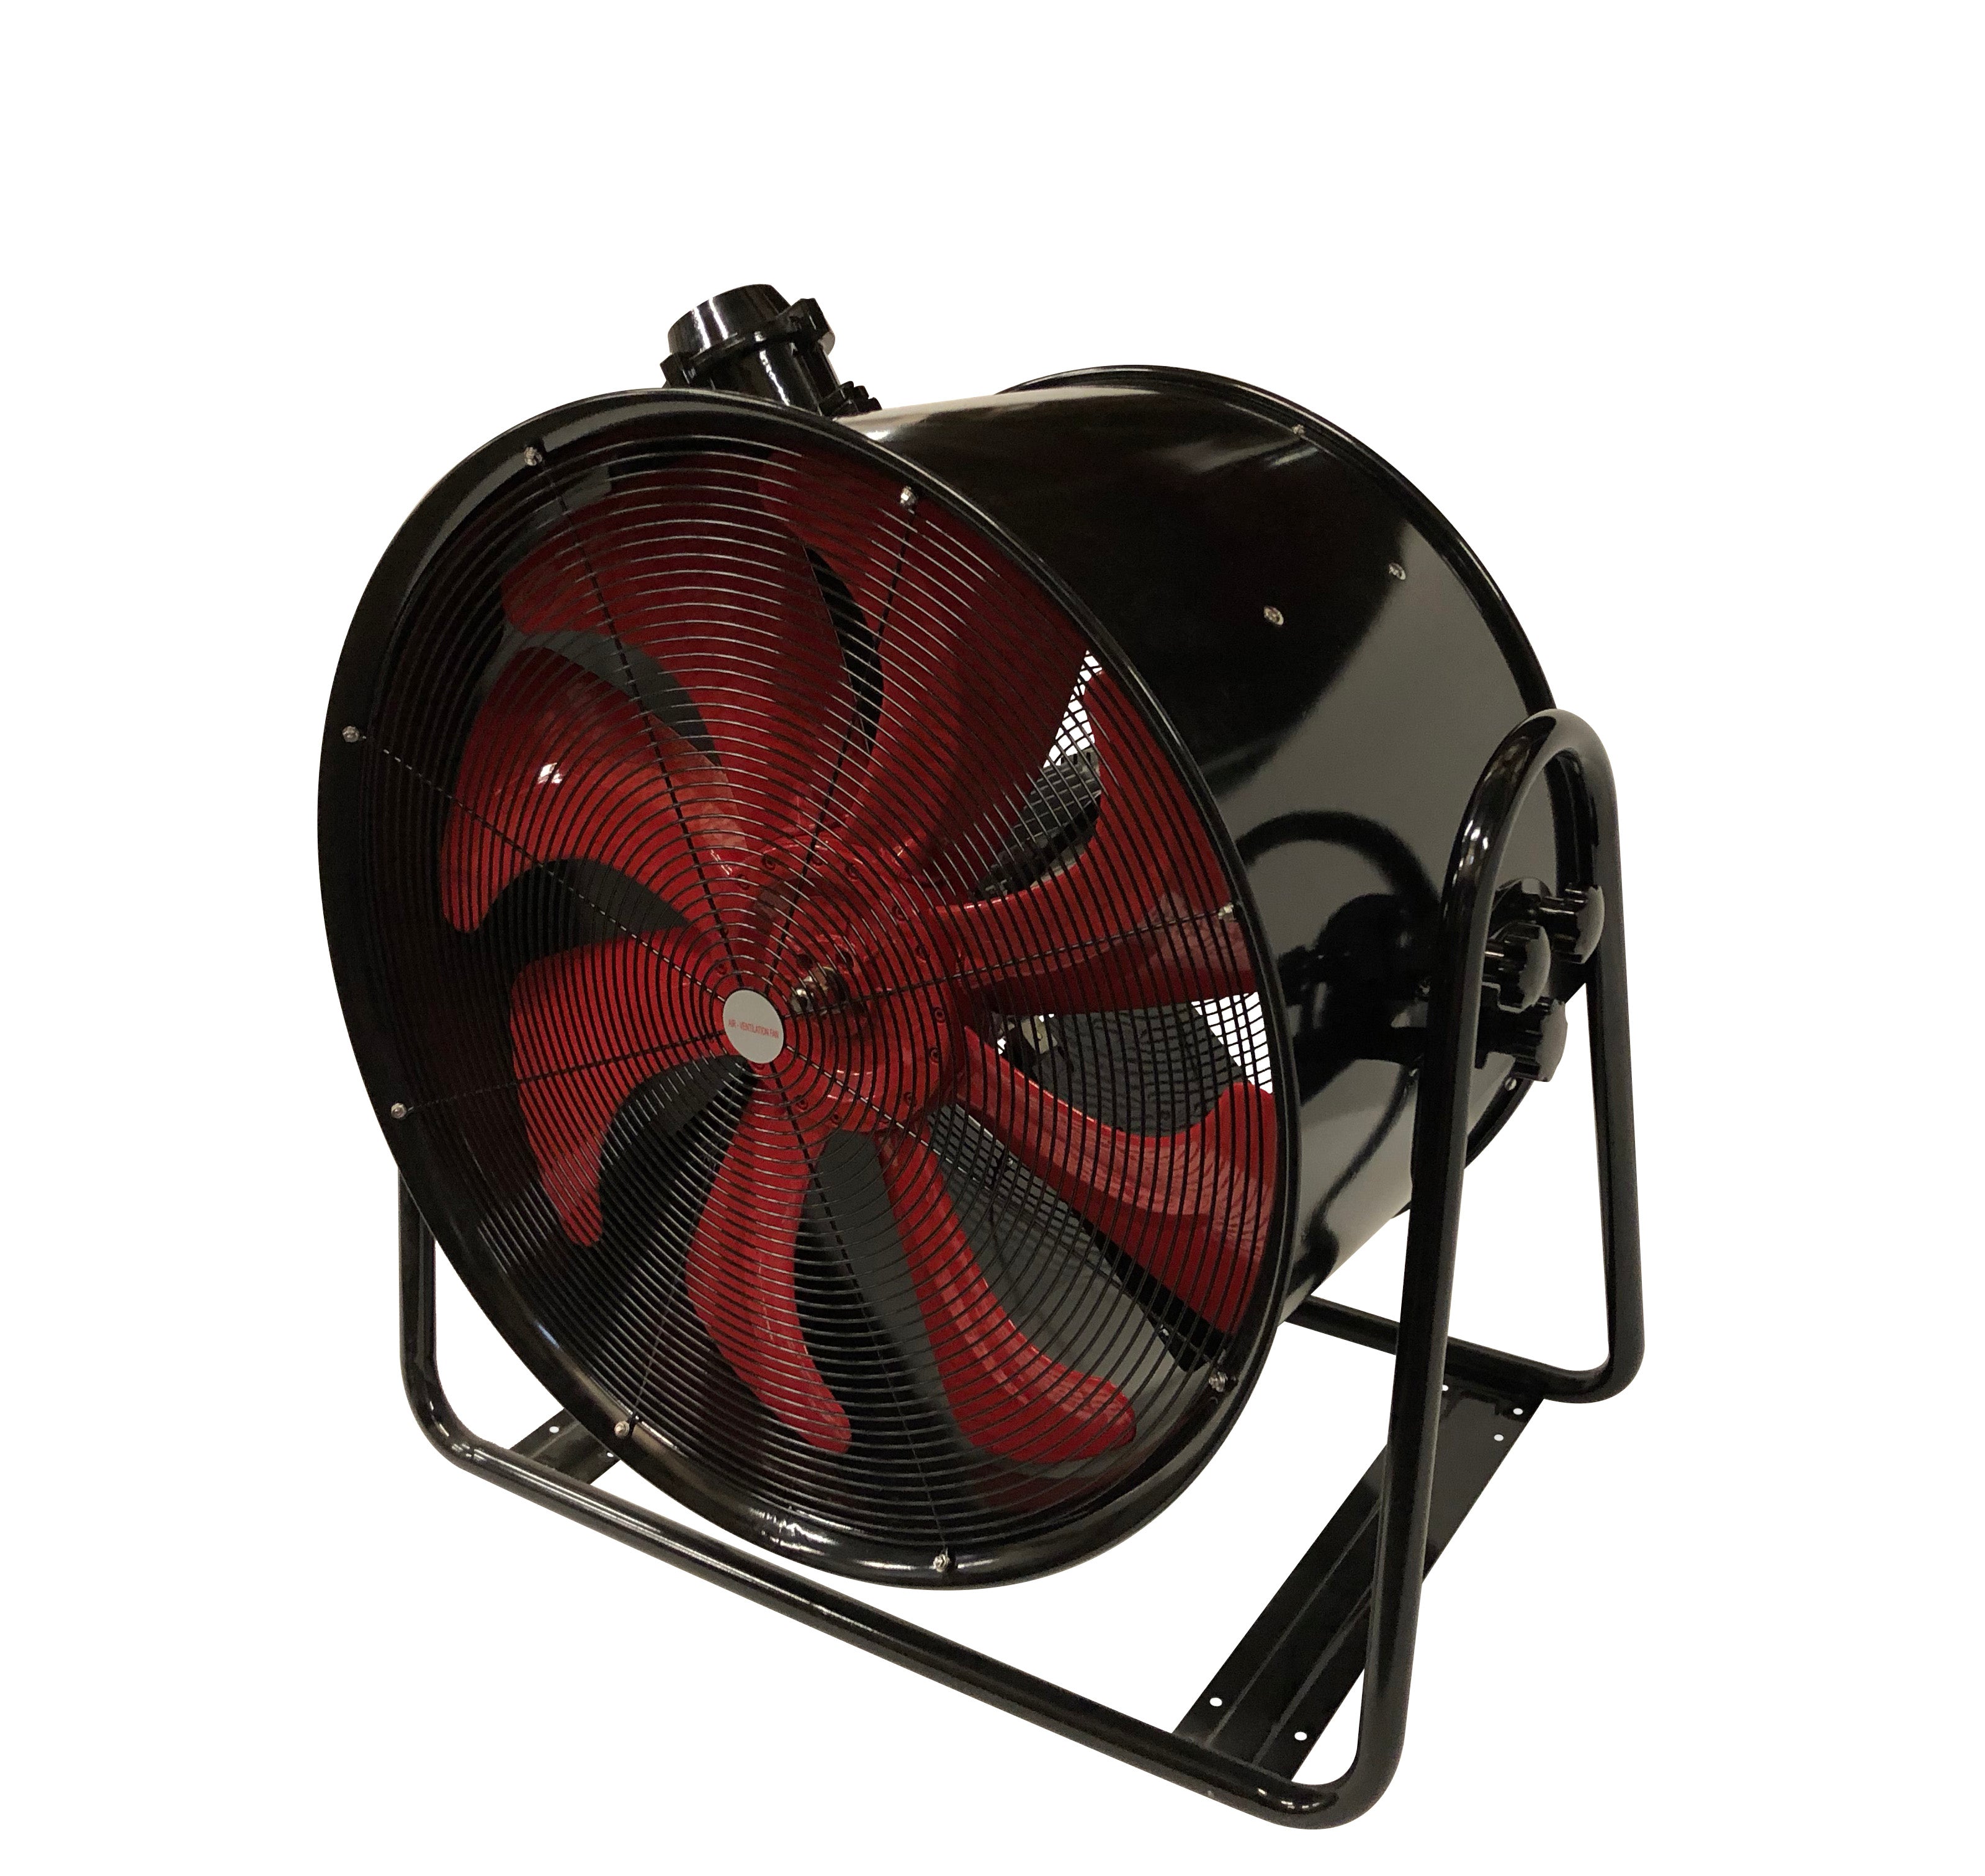 duct-inline-exhaust-fans-portable-tube-axial-fans.jpg